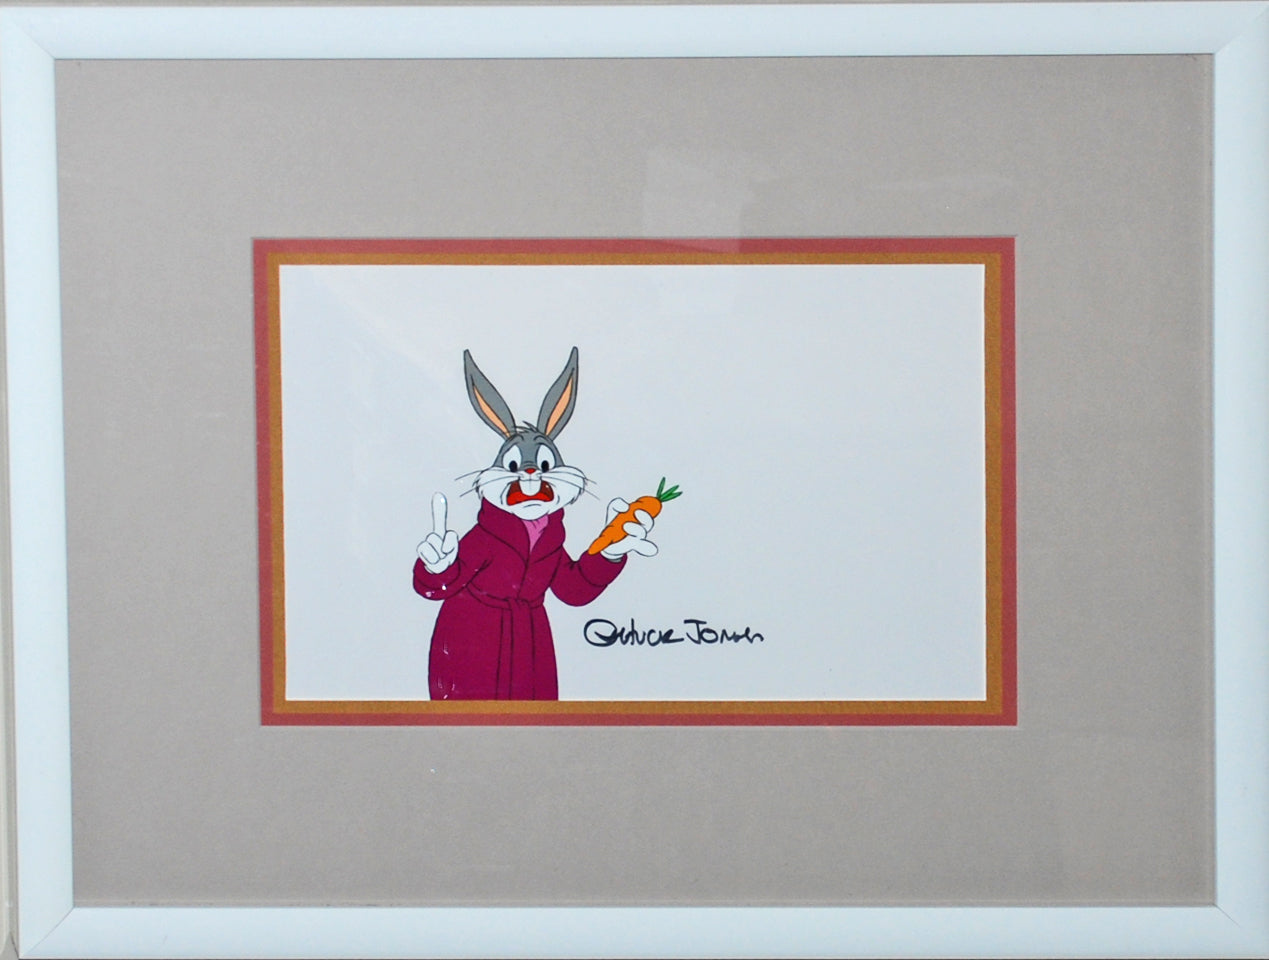 Warner Brothers Production Cel featuring Bugs Bunny from the Bugs Bunny/ Road Runner Movie